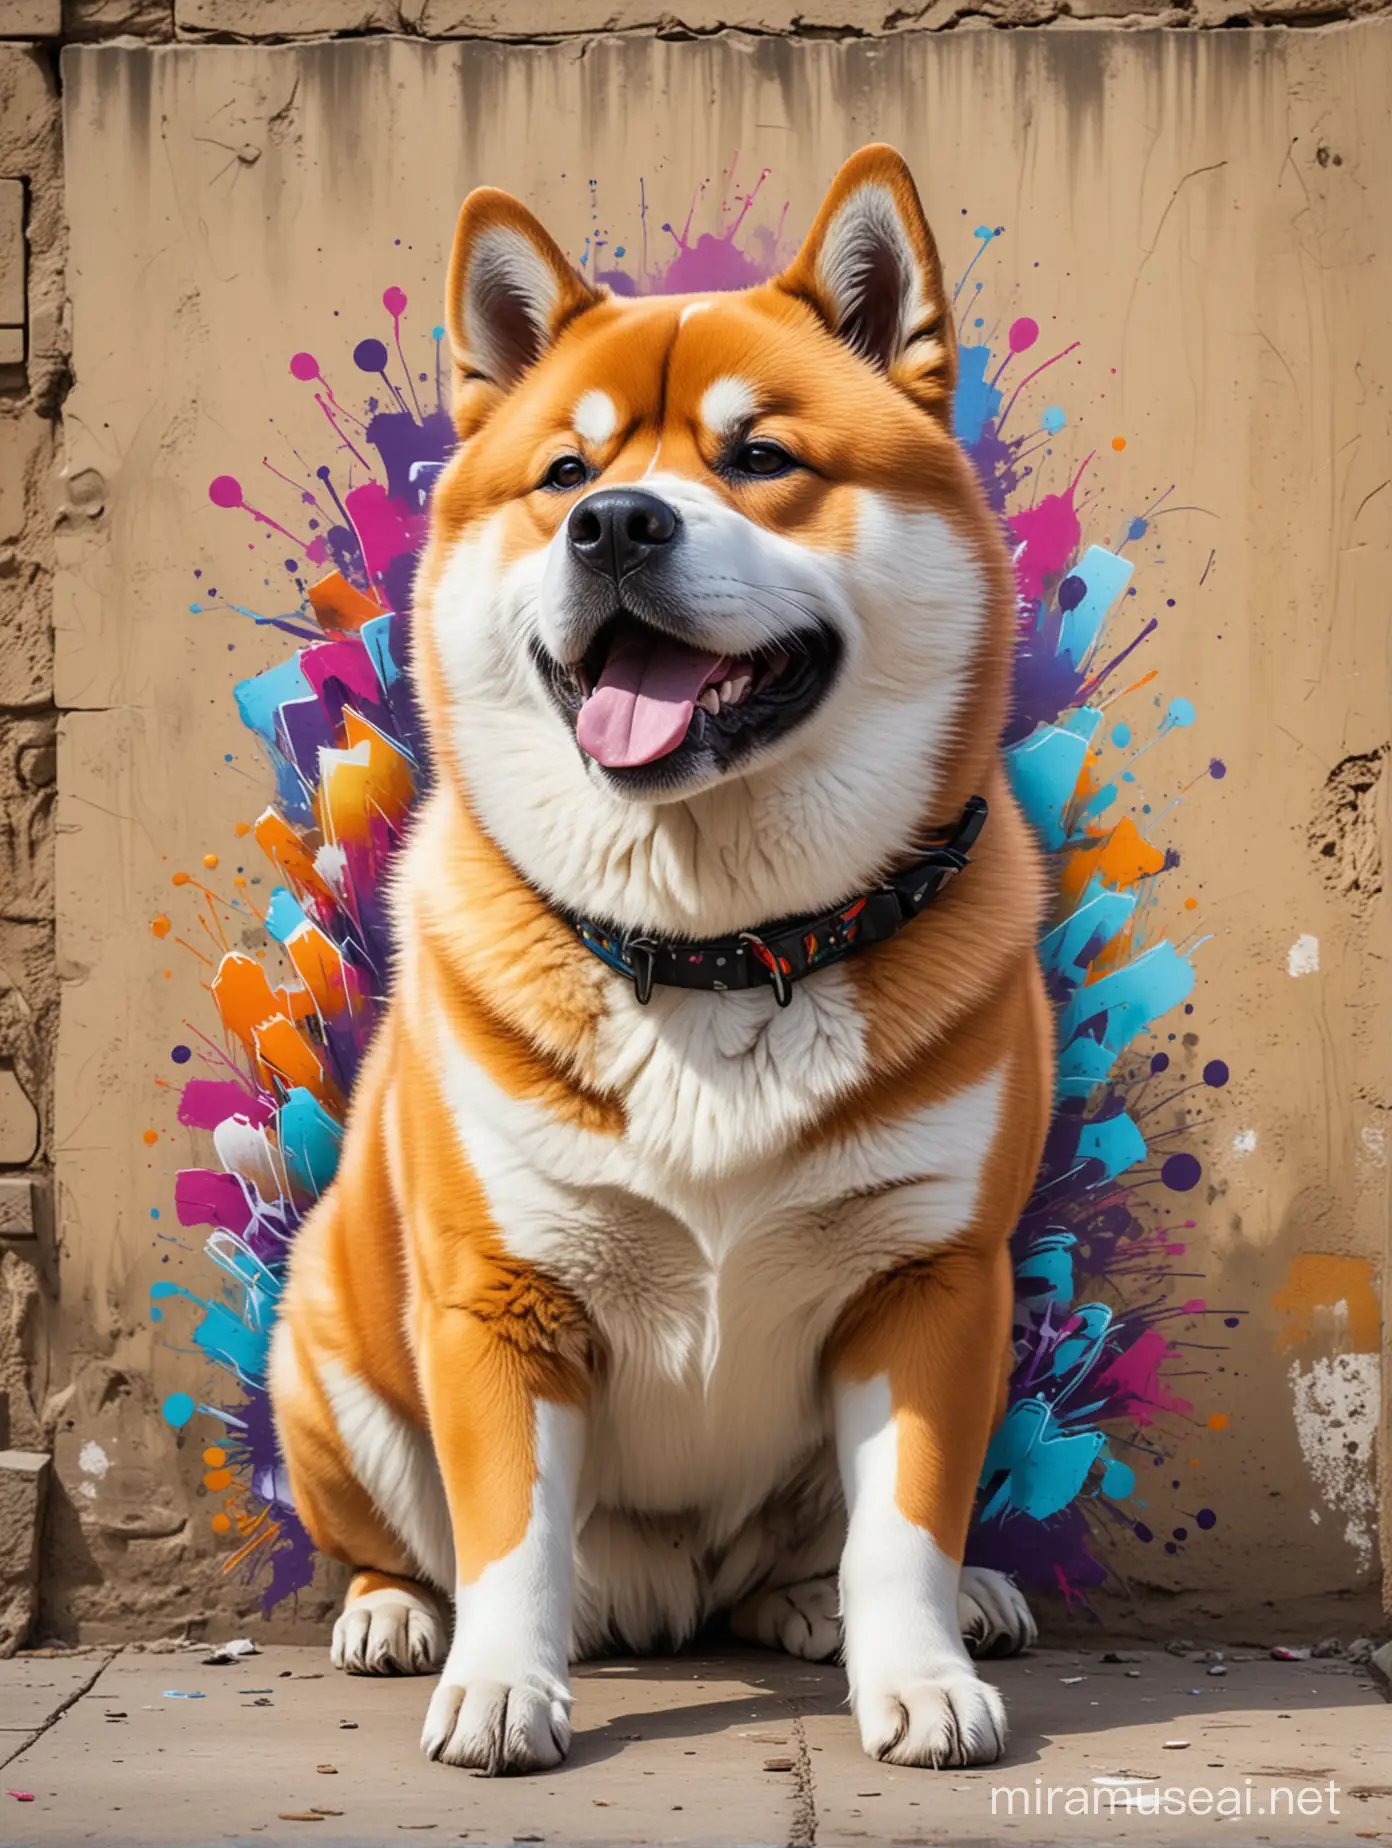 art movement focused on emotional impact through free-flowing shapes and colors, often without depicting real objects,
Create a graffiti of a happy Akita Inu dog on the foreground, colorful graffiti art, on a wall, rustic background, graffiti art style